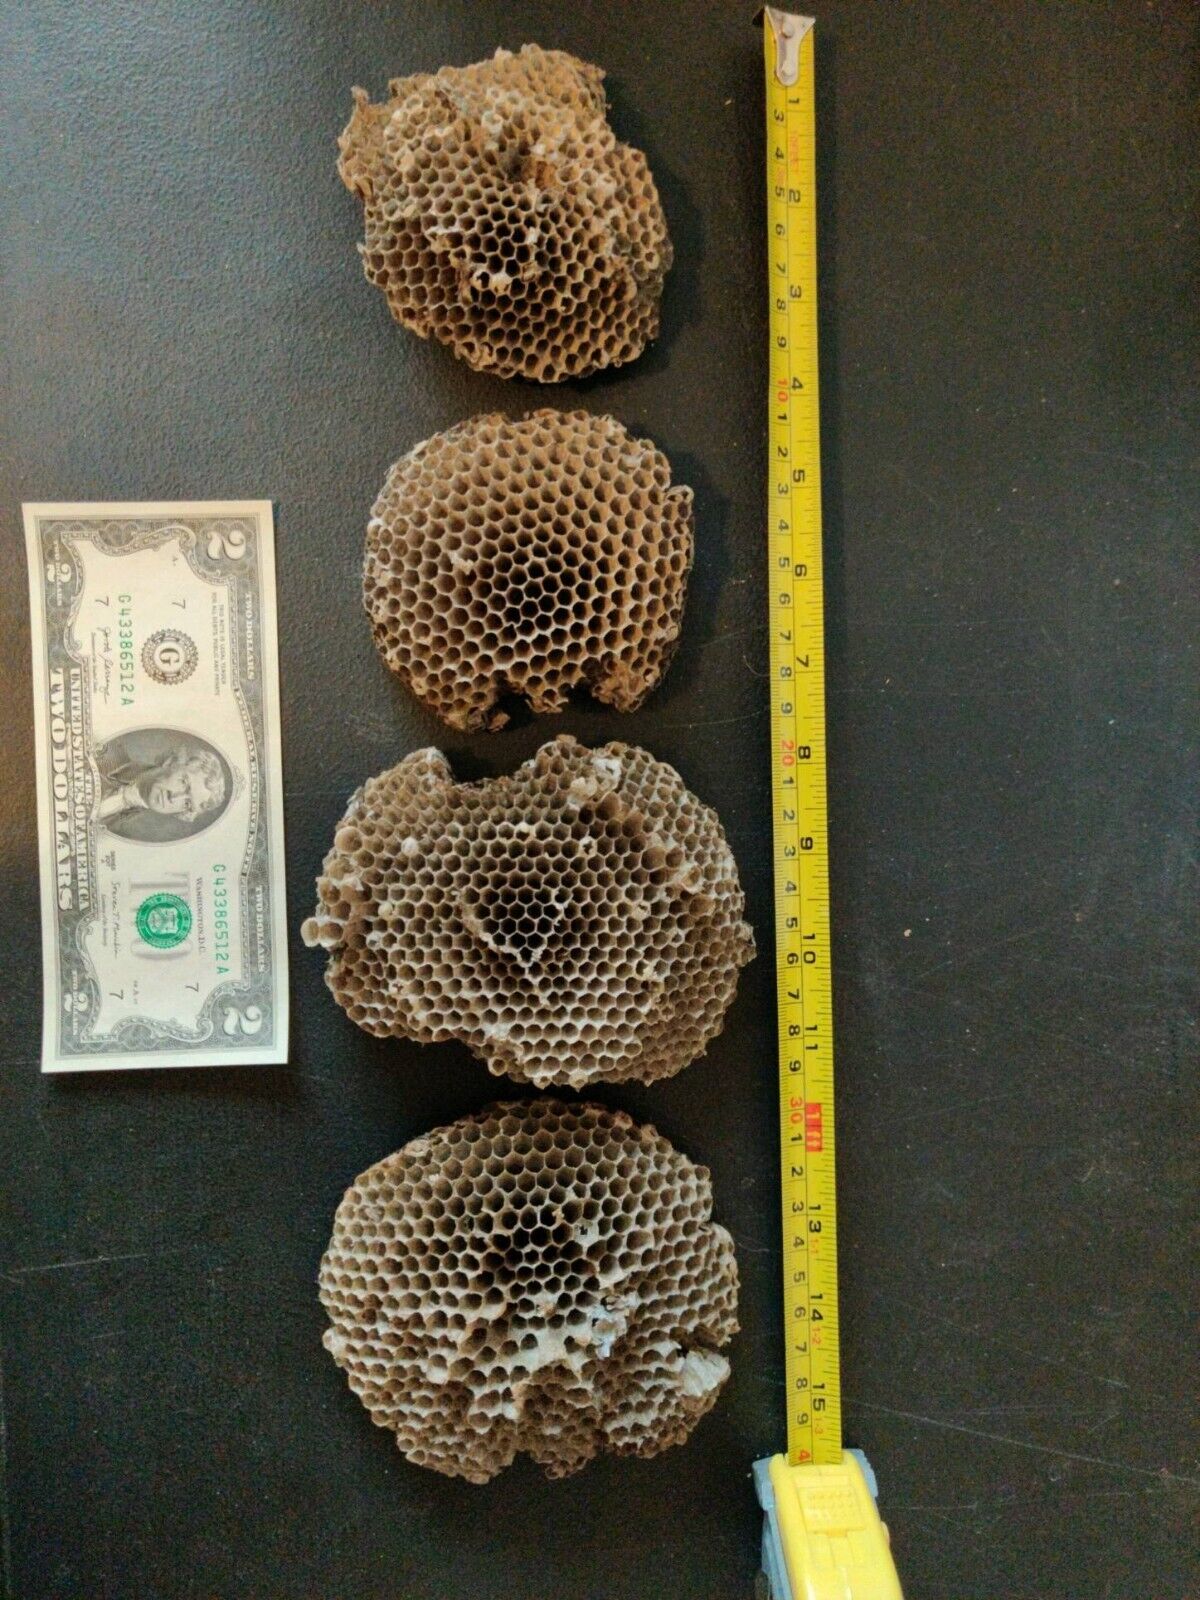 Paper Wasp Nest - Lot of 4